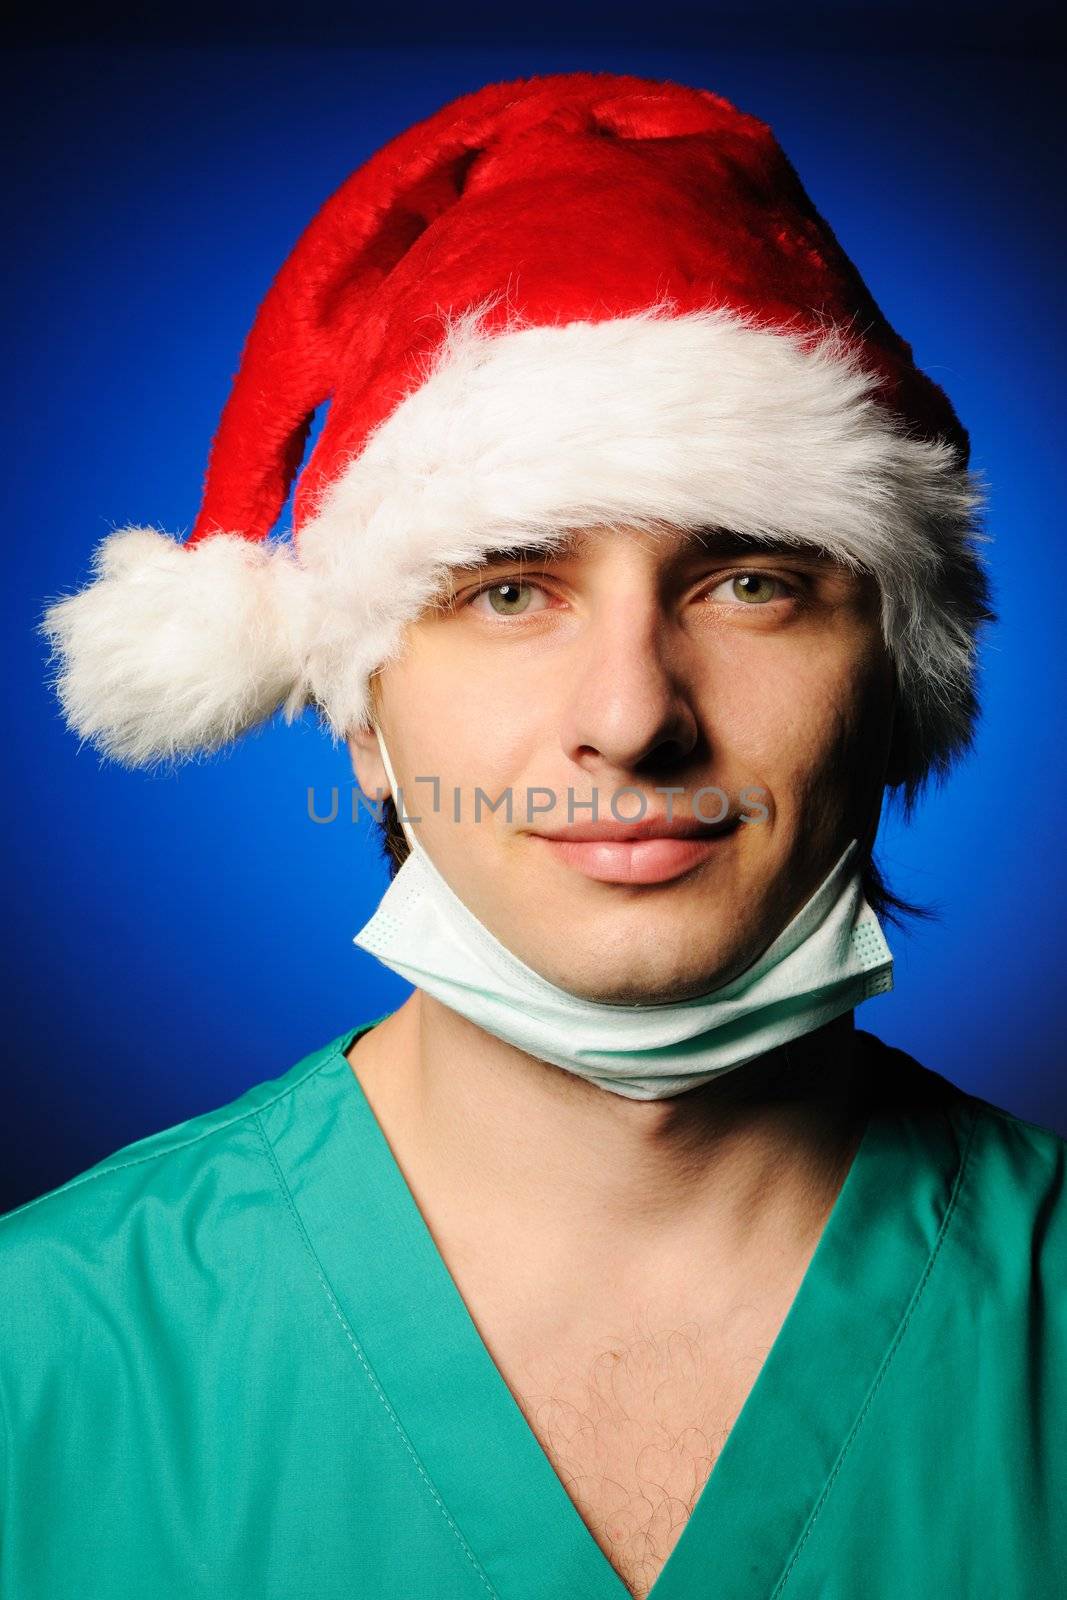 Surgeon with mask in Santa's hat